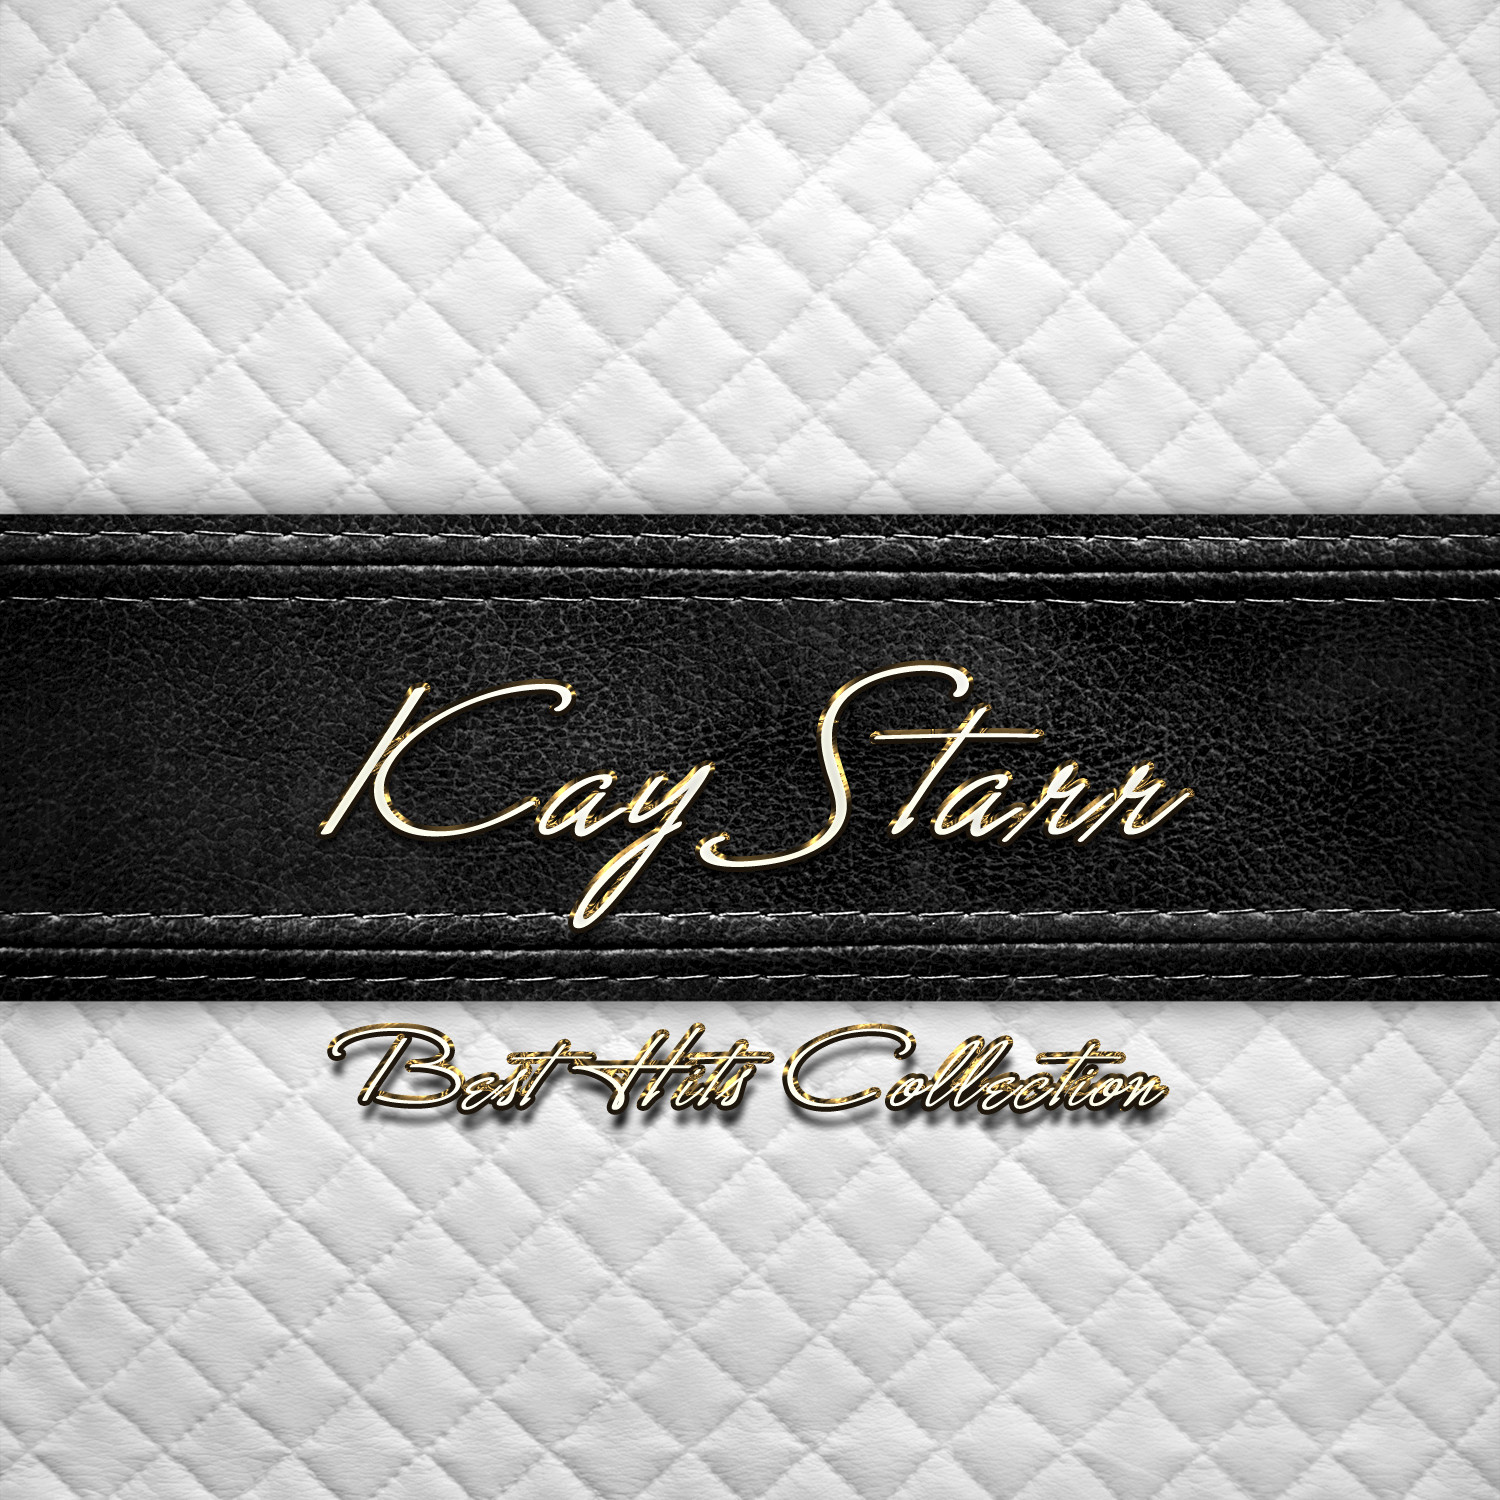 Best Hits Collection of Kay Starr